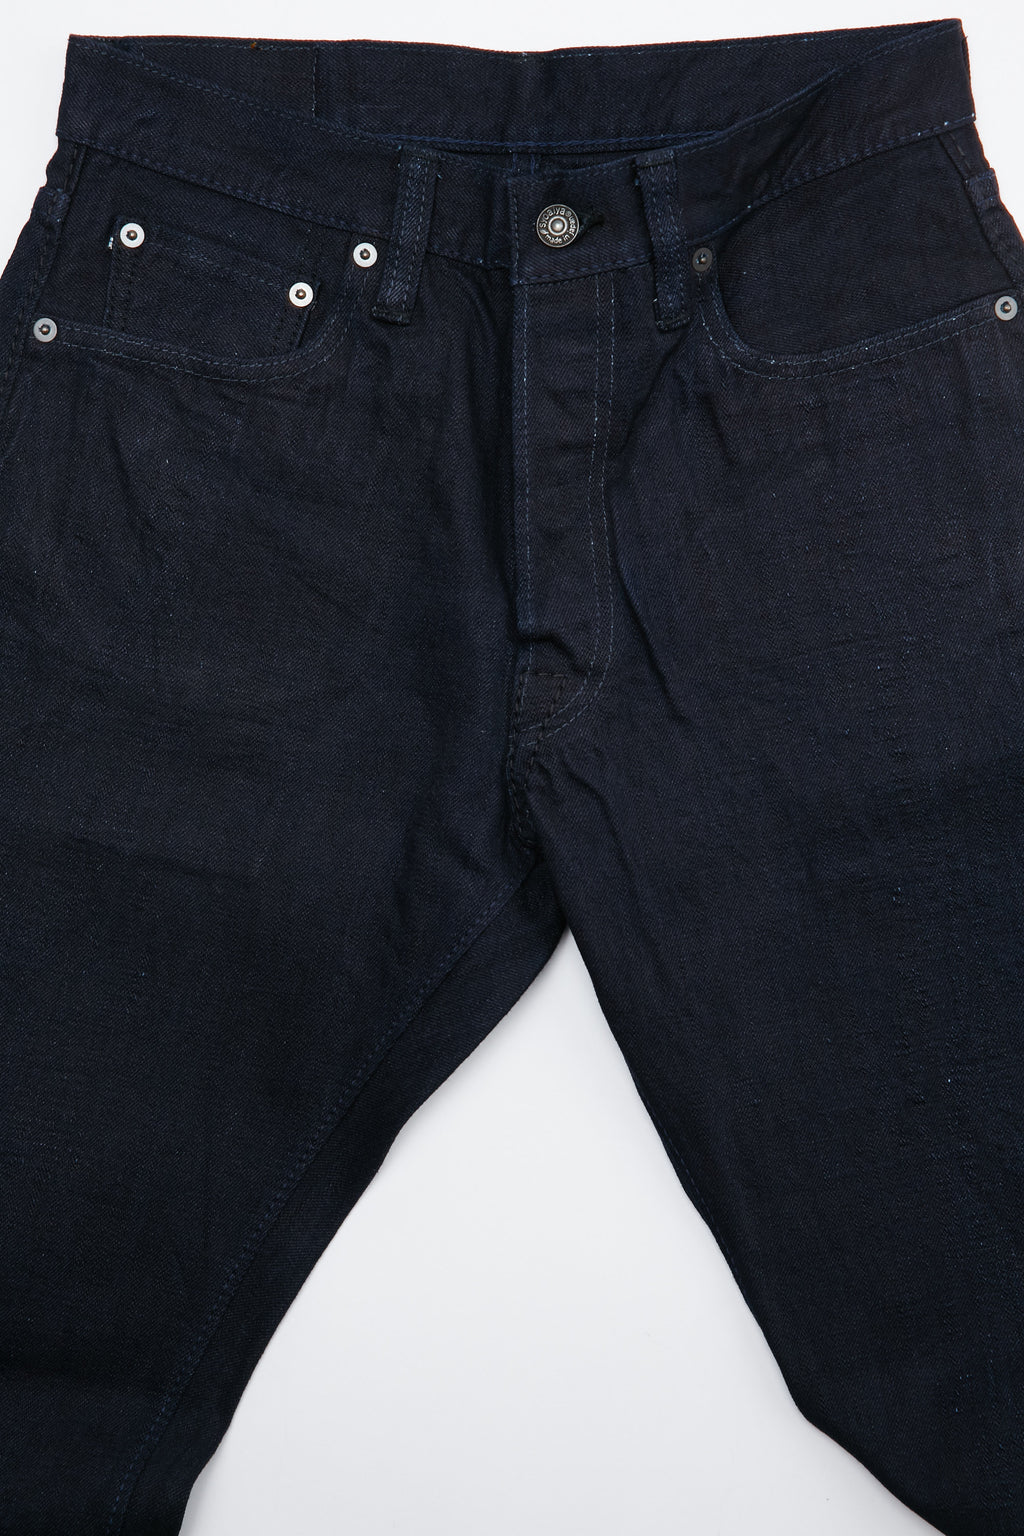 Pure Blue Japan XX-019-WID 14 oz. Relaxed Tapered - Deep Indigo with O ...